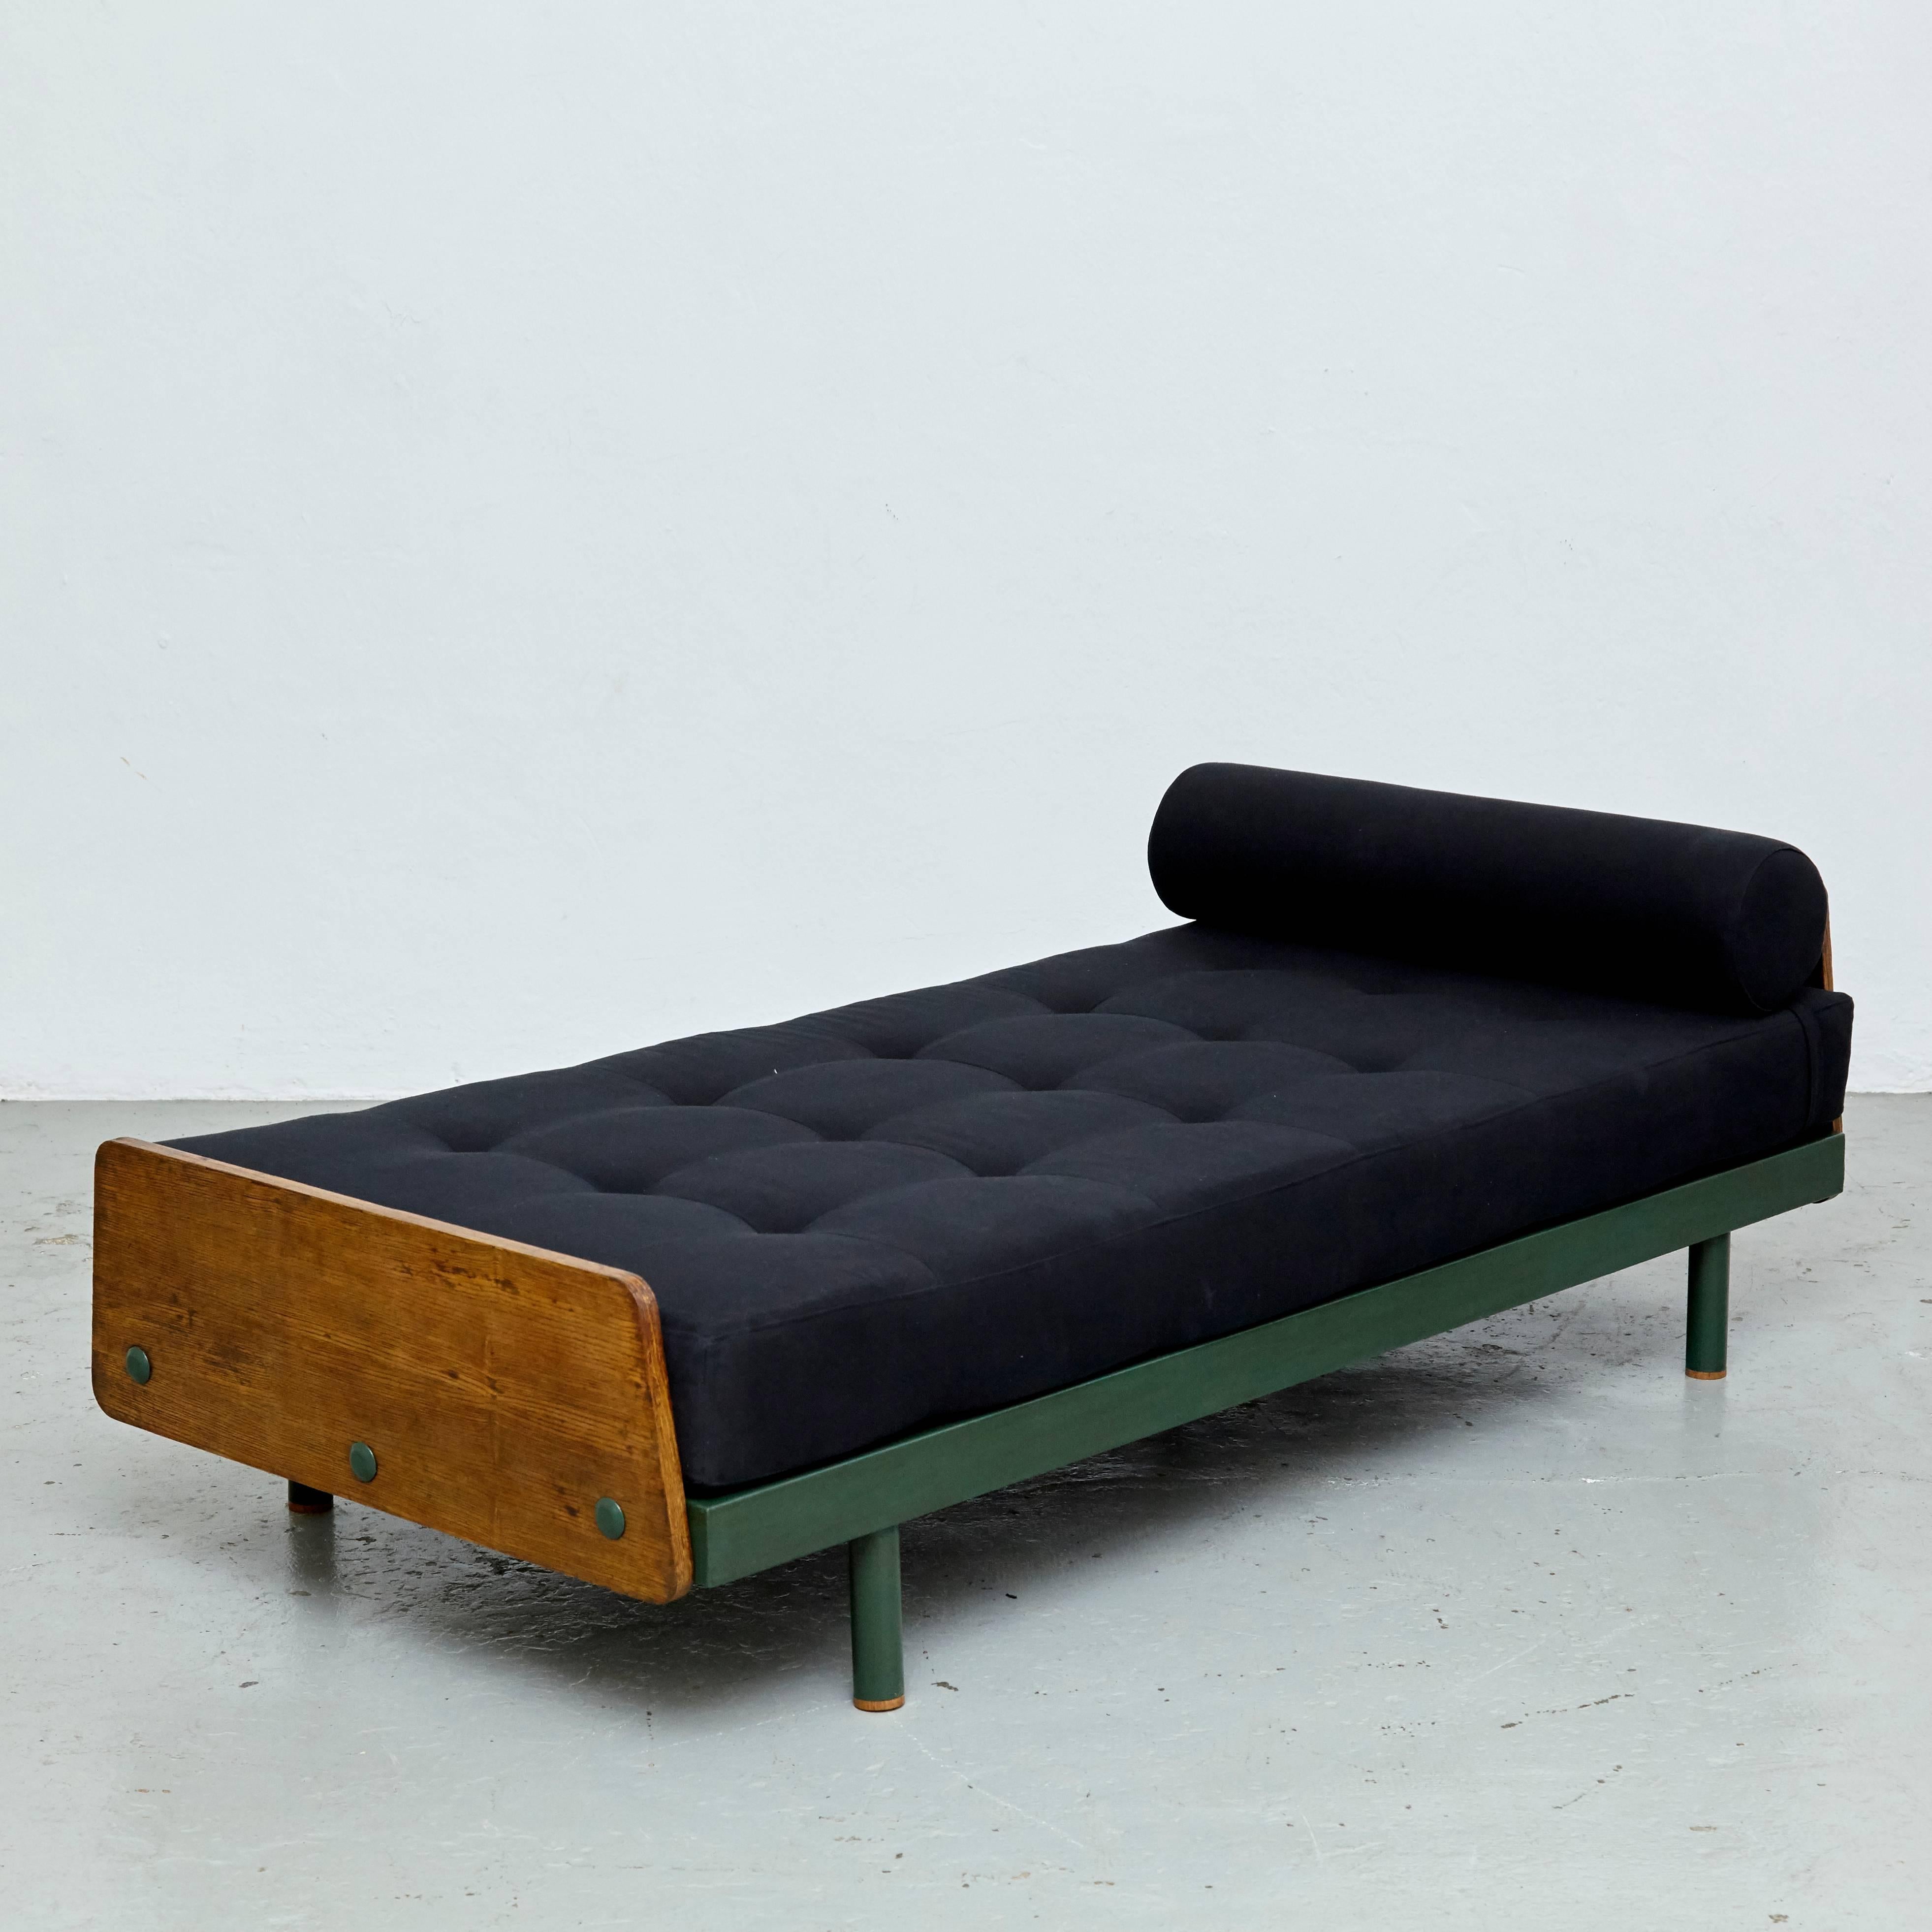 S.C.A.L. daybed designed by Jean Prouve.
Manufactured by Ateliers Prouve, France, circa 1950.
This bed has been restored.
Metal frame, wood, new upholstery.

In good condition, with minor wear consistent with age and use, preserving a beautiful